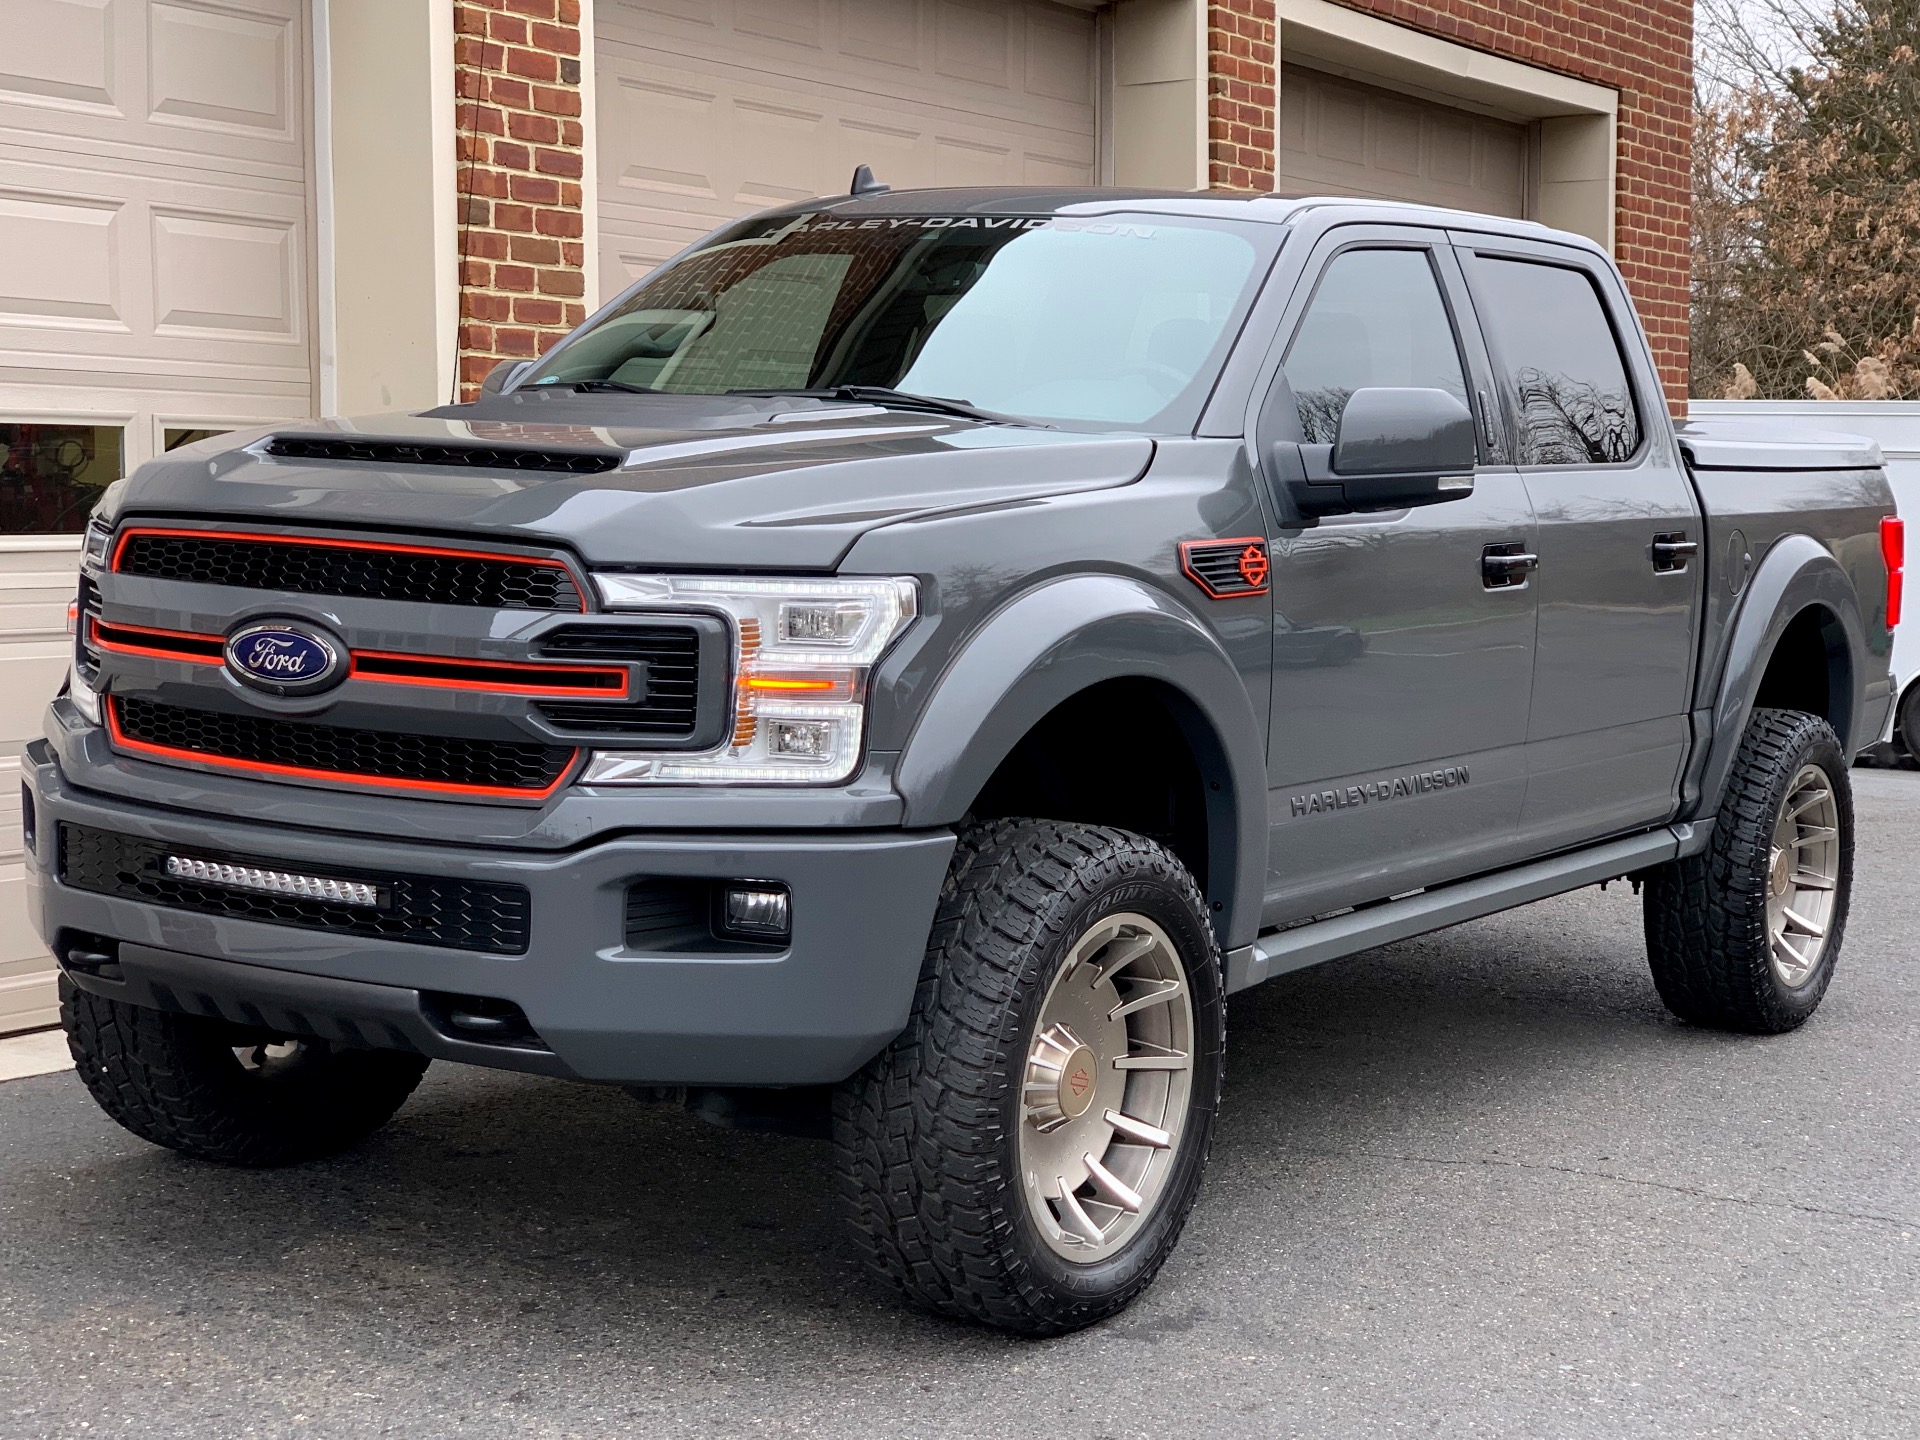 2019 Ford F150 Harley Davidson Stock C61917 for sale near Edgewater